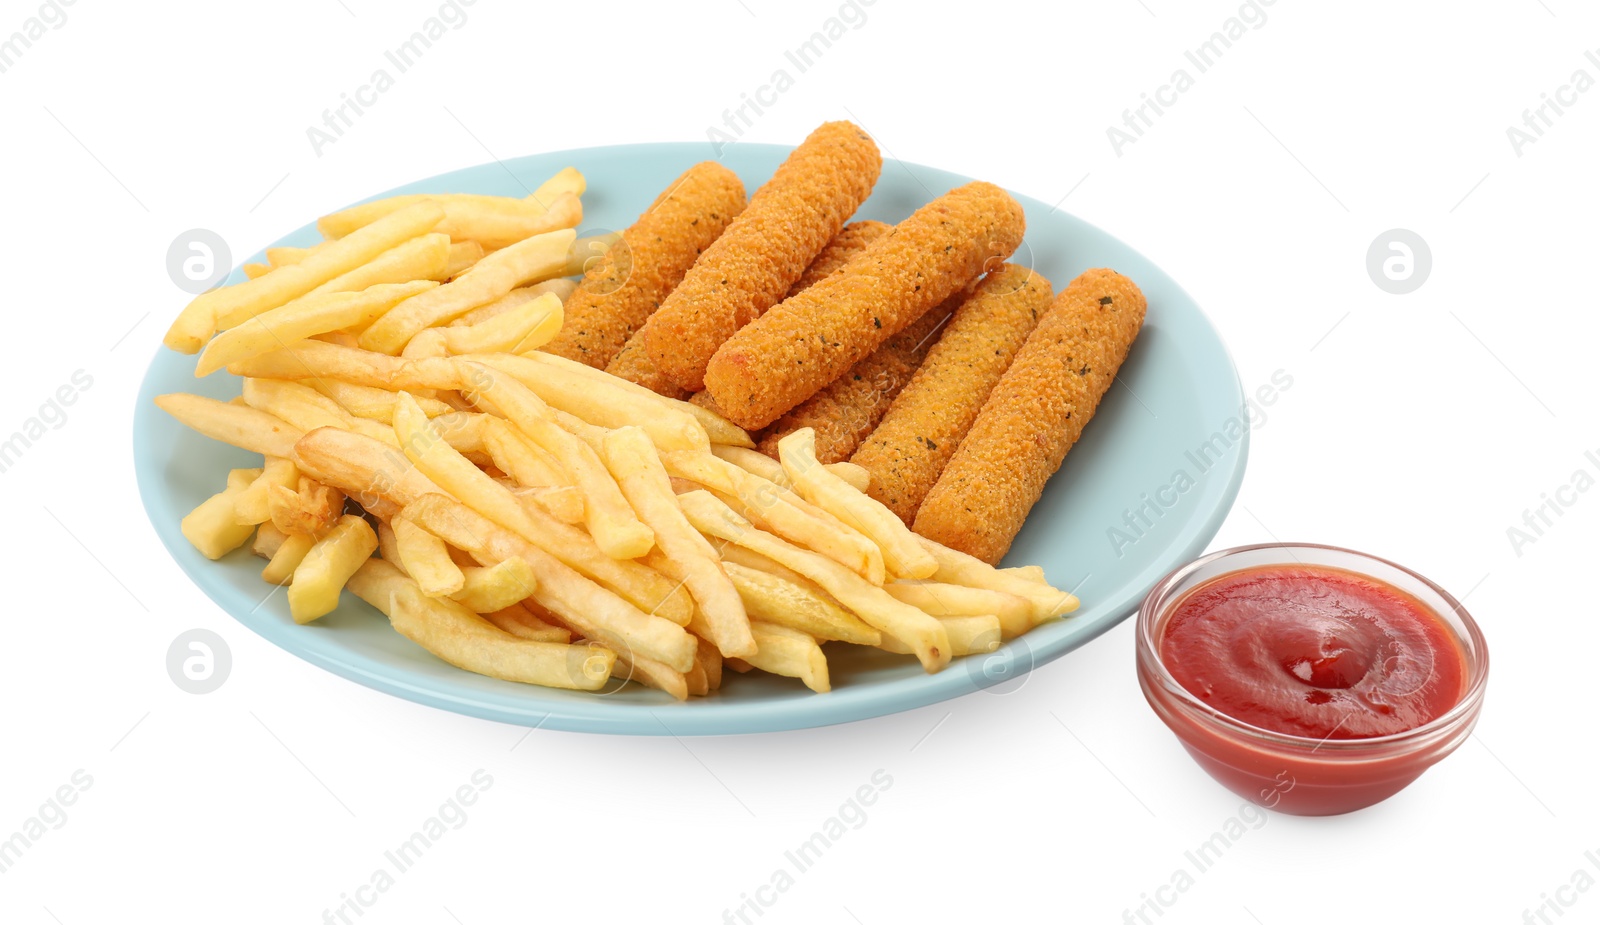 Photo of Tasty french fries, cheese sticks and ketchup on white background